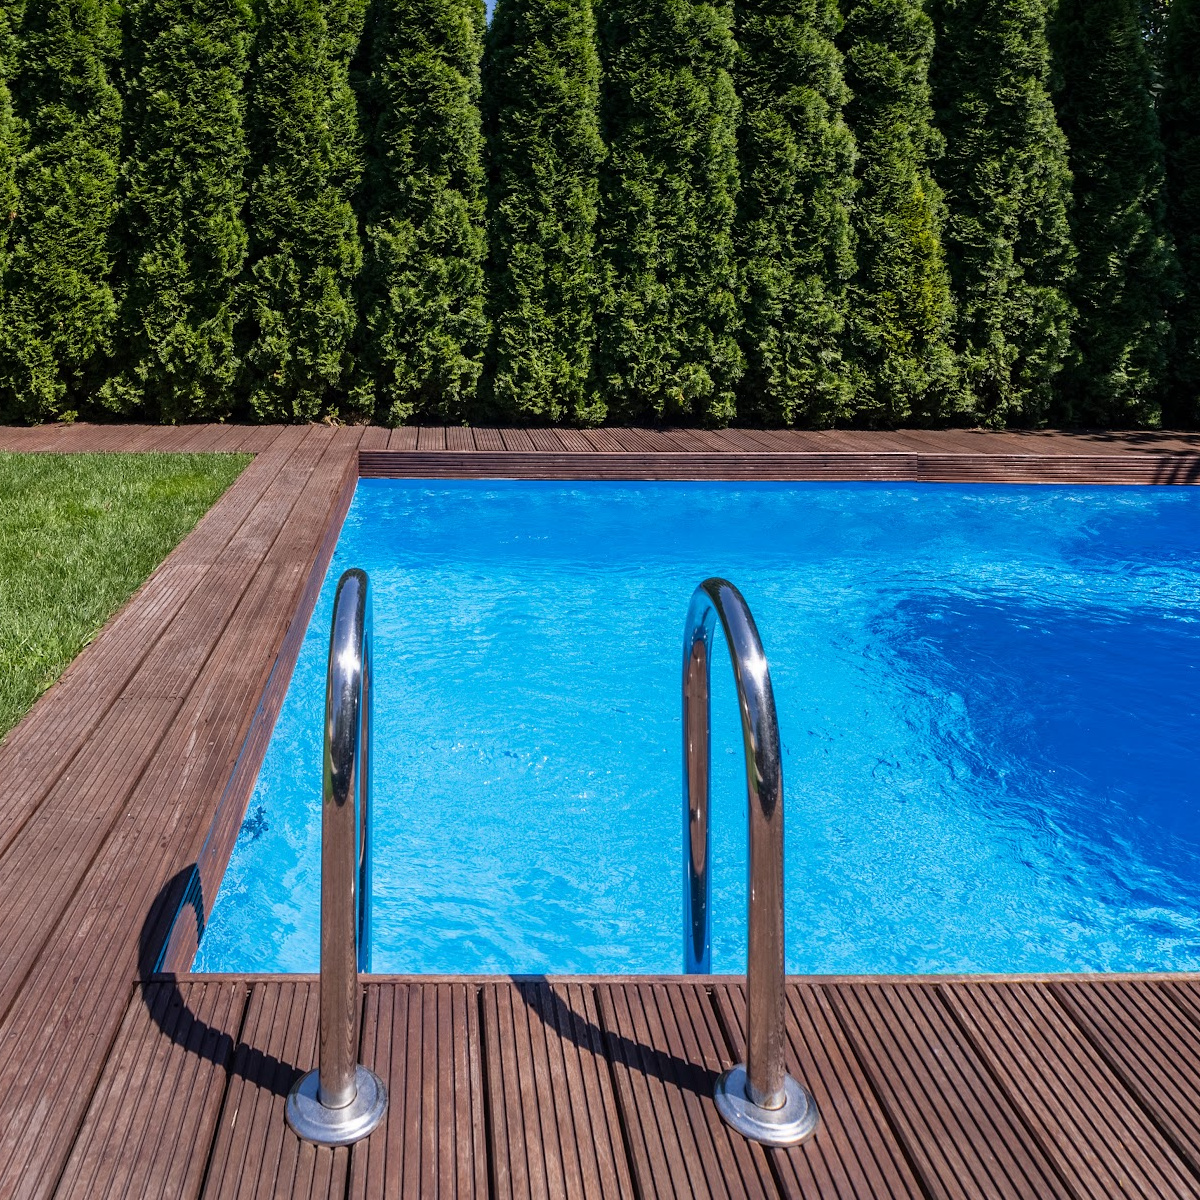 Chlorine and Bromine for Pools